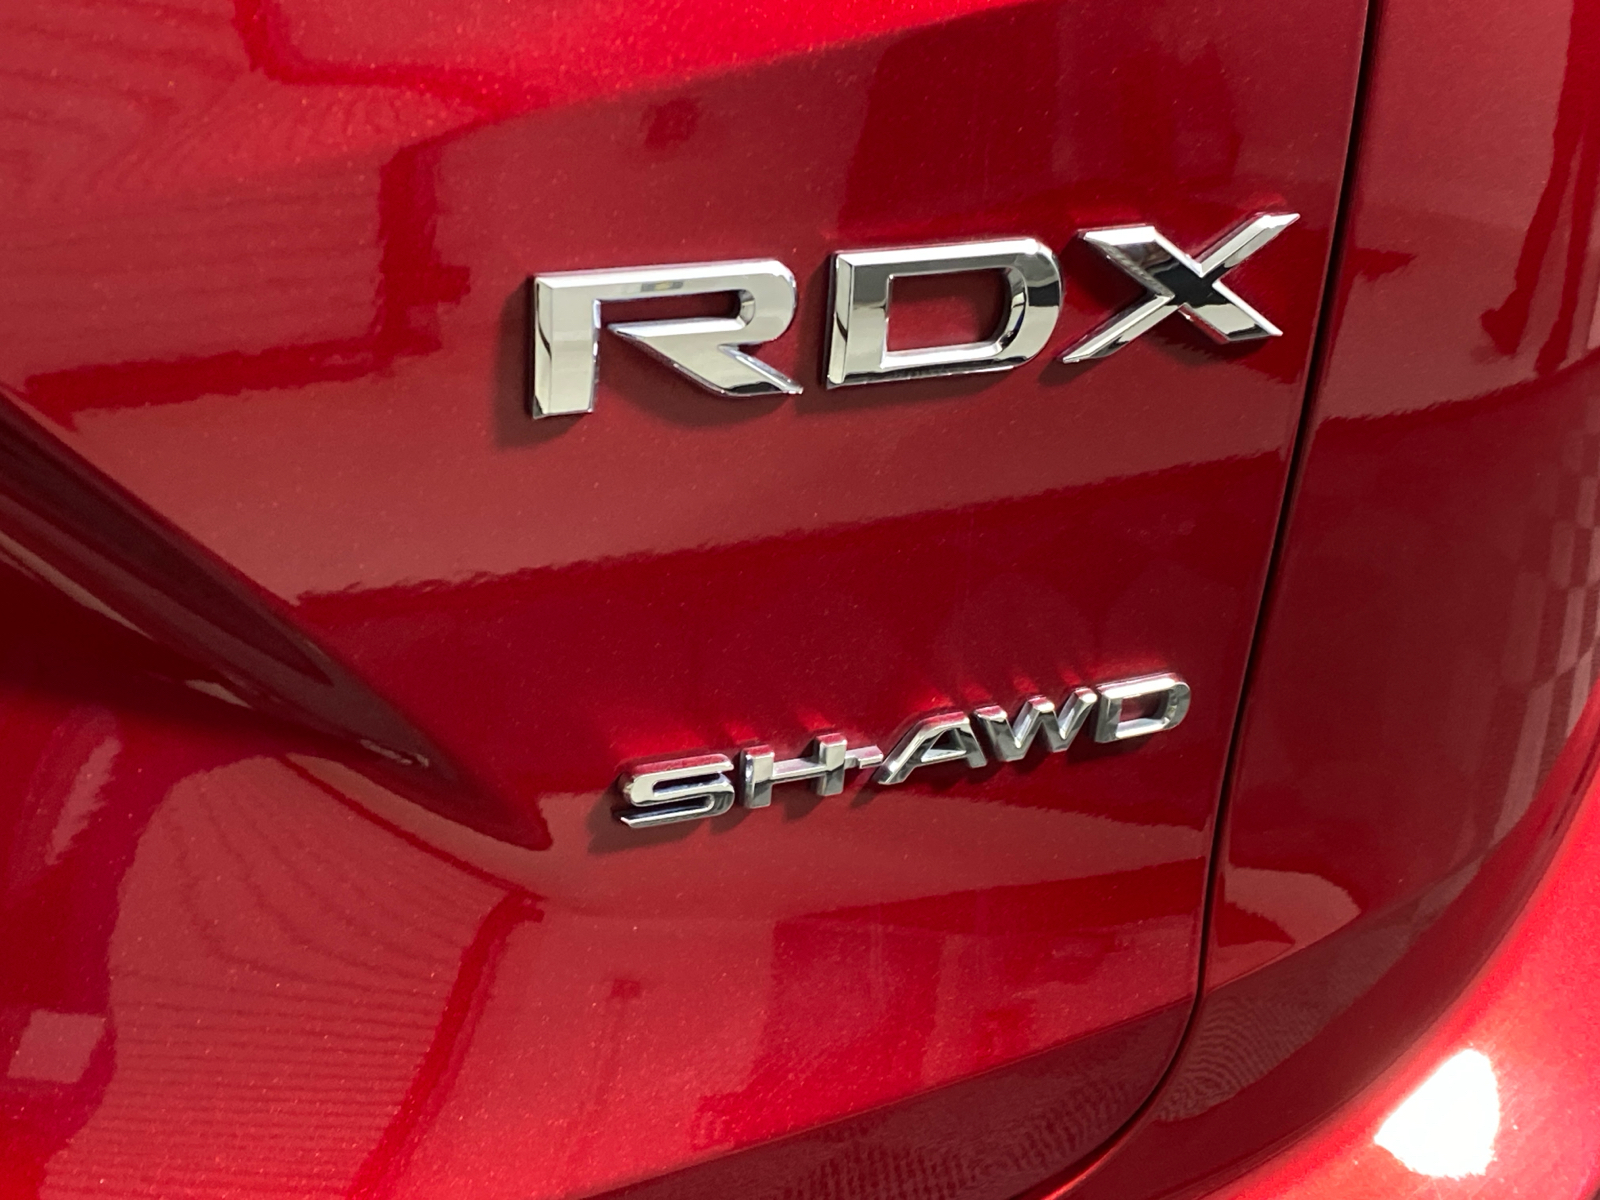 2021 Acura RDX Technology Package 9